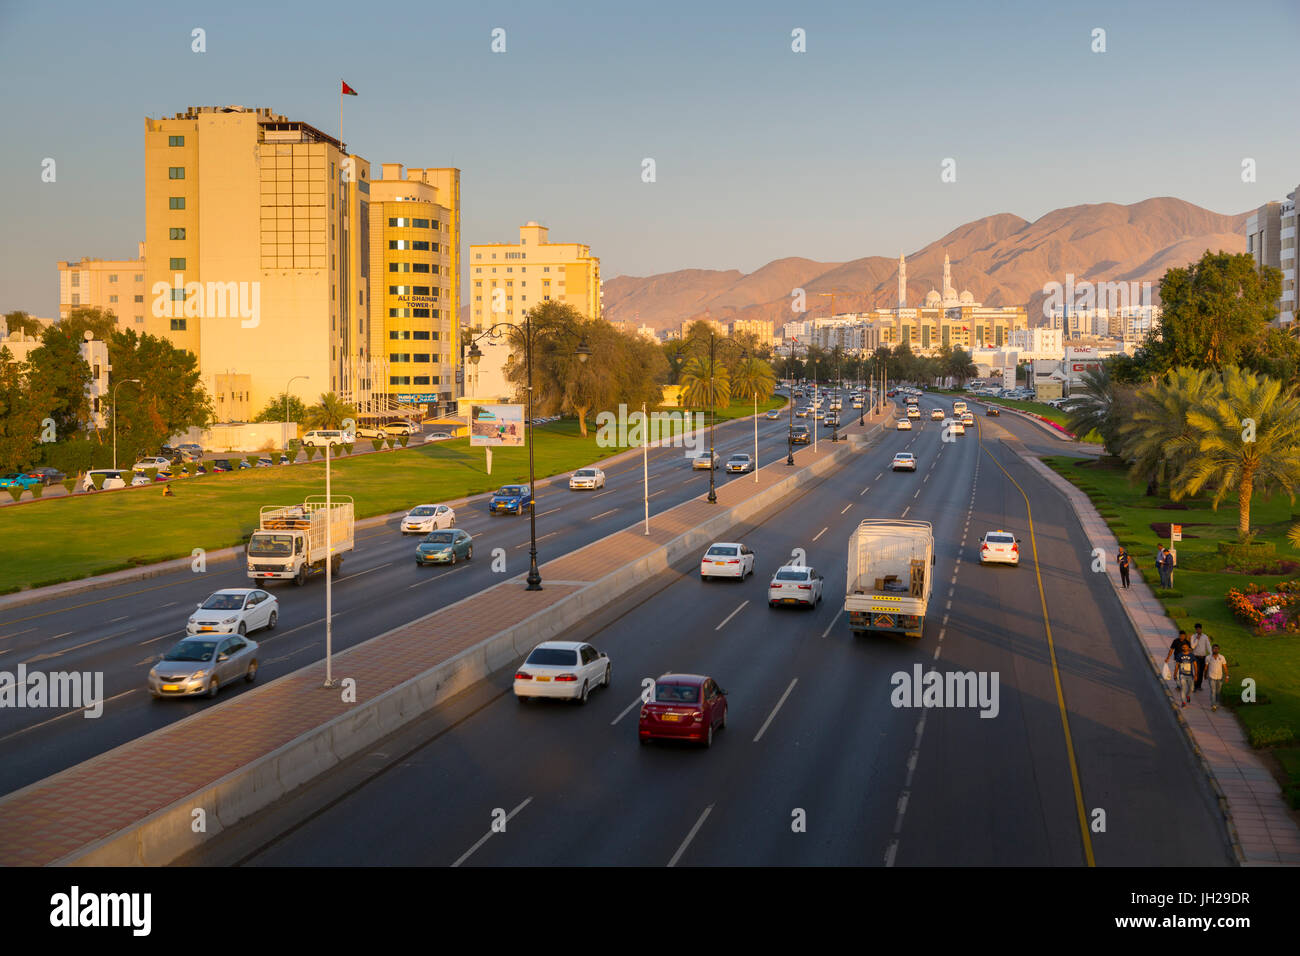 Mohammed Al Ameen Mosque and traffic on Sultan Qaboos Street, Muscat, Oman, Middle East Stock Photo